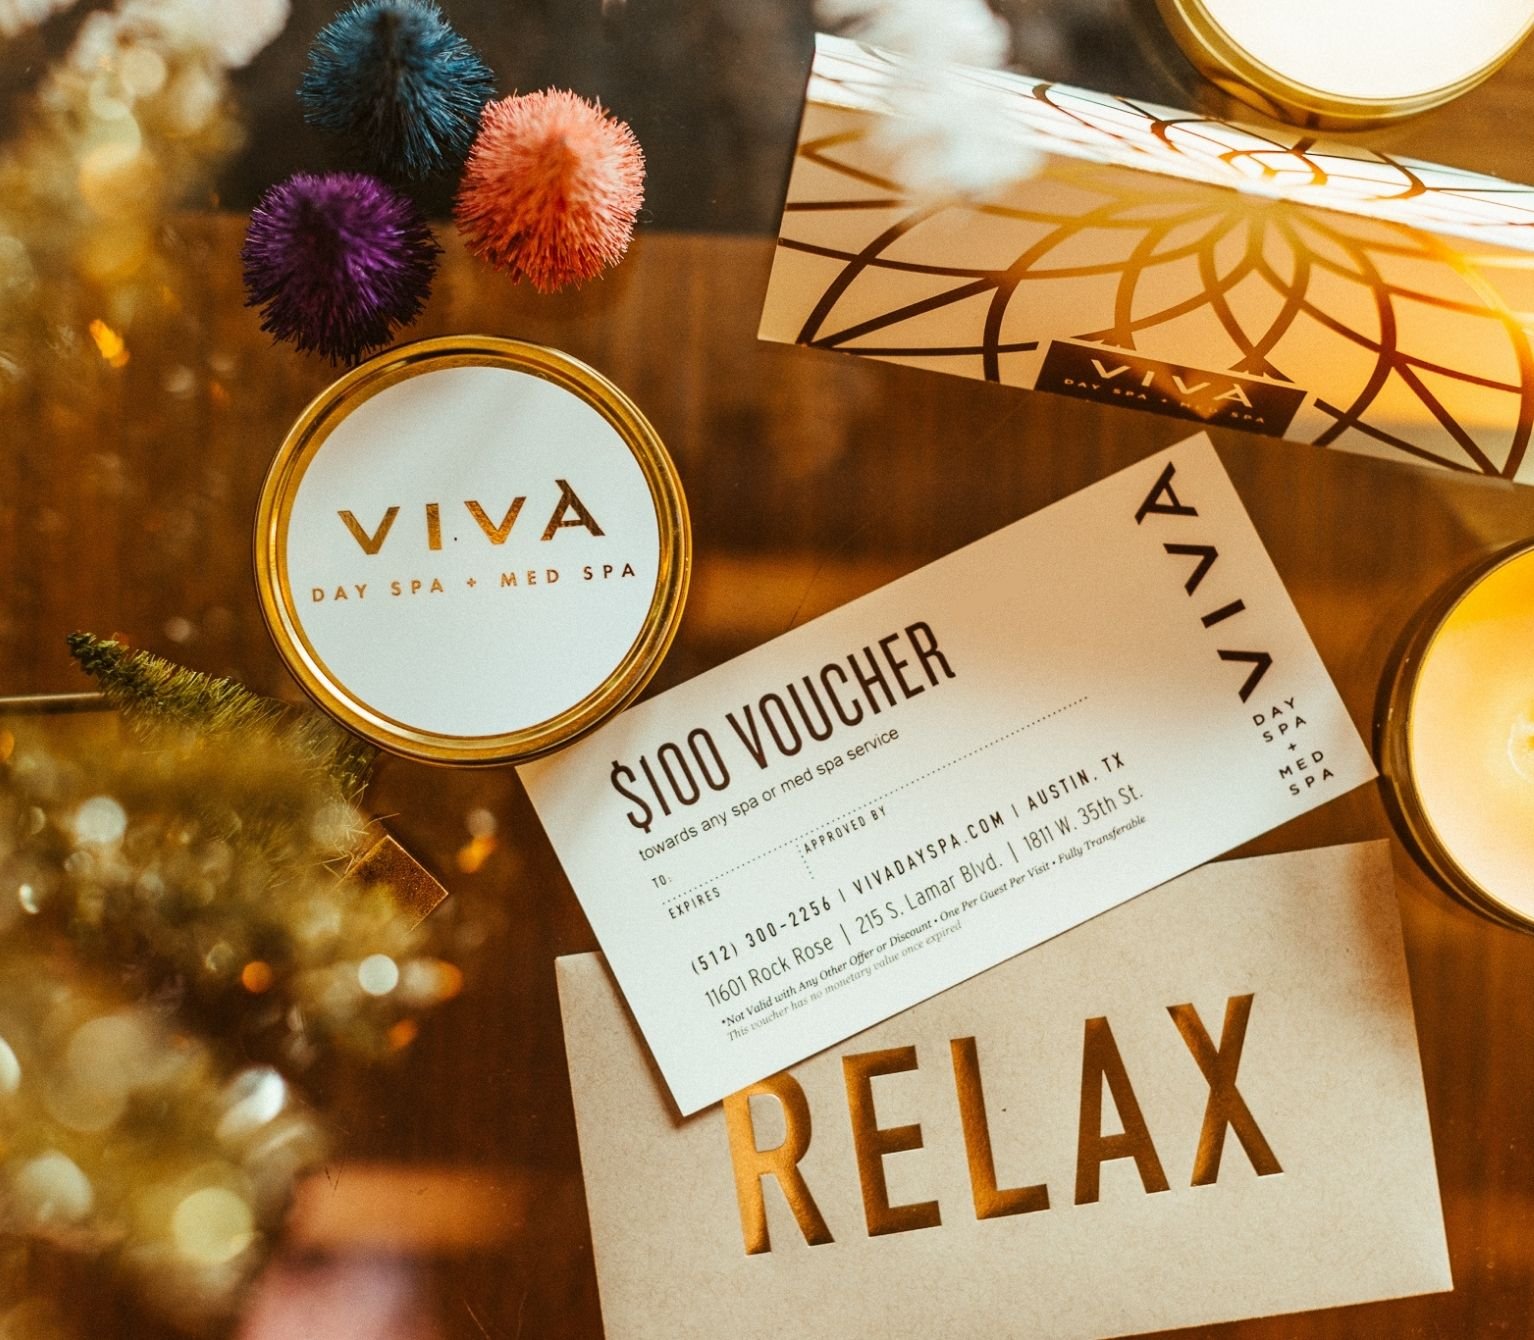 Viva Day Spa Holiday Gift Certificate Offer 2021